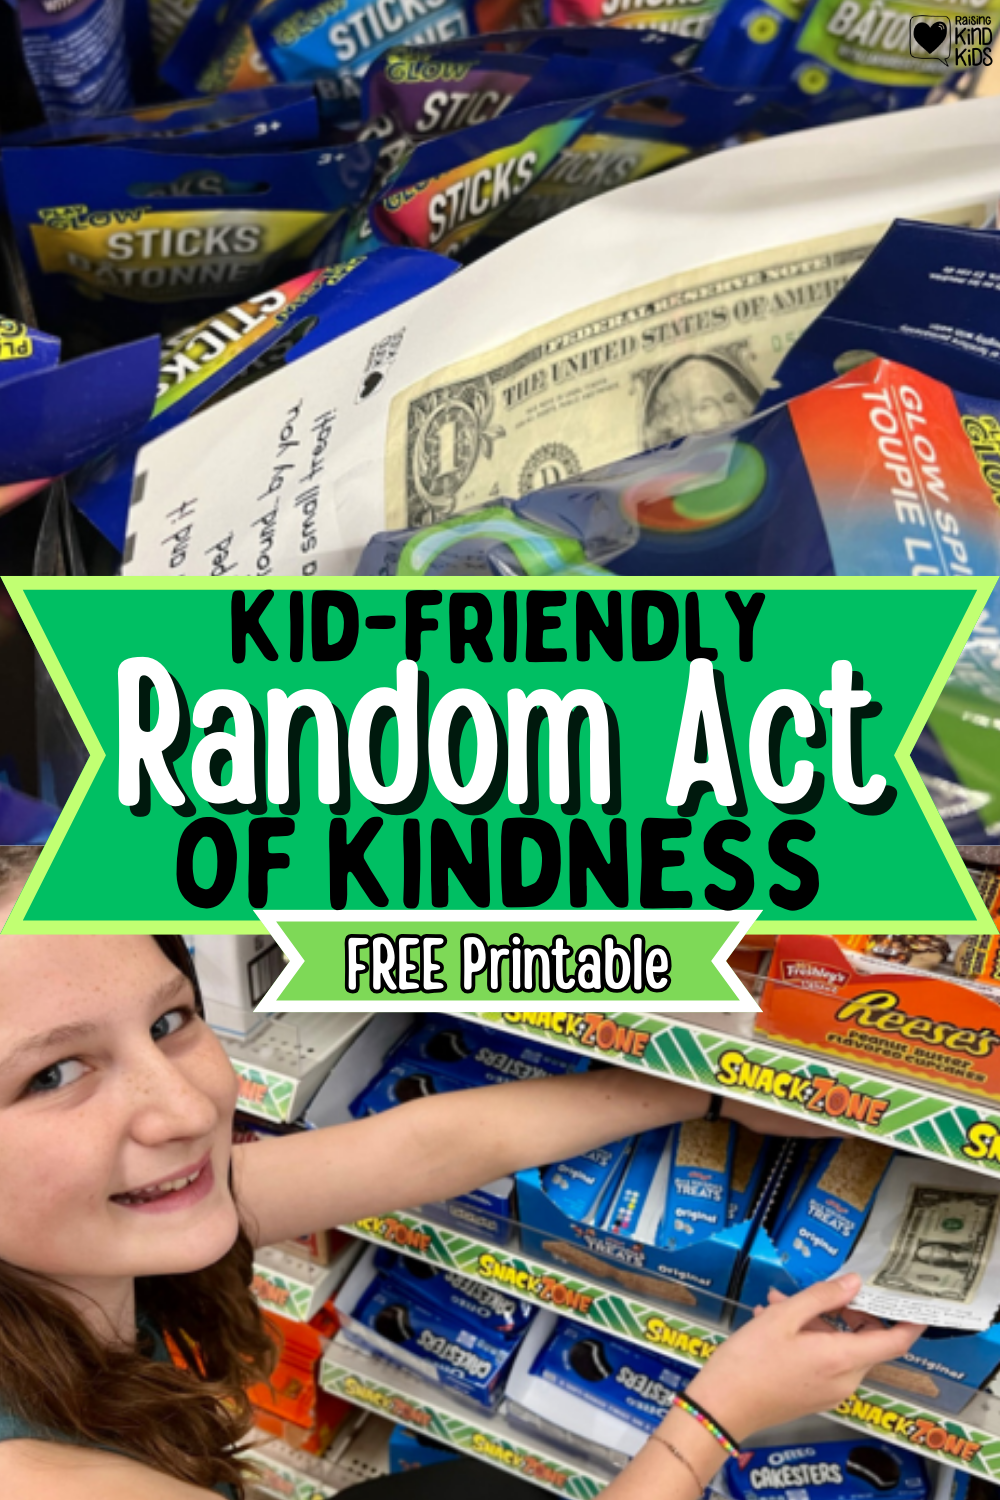 Use this hide a dollar random act of kindness for kids that only costs one dollar to spread kindness.